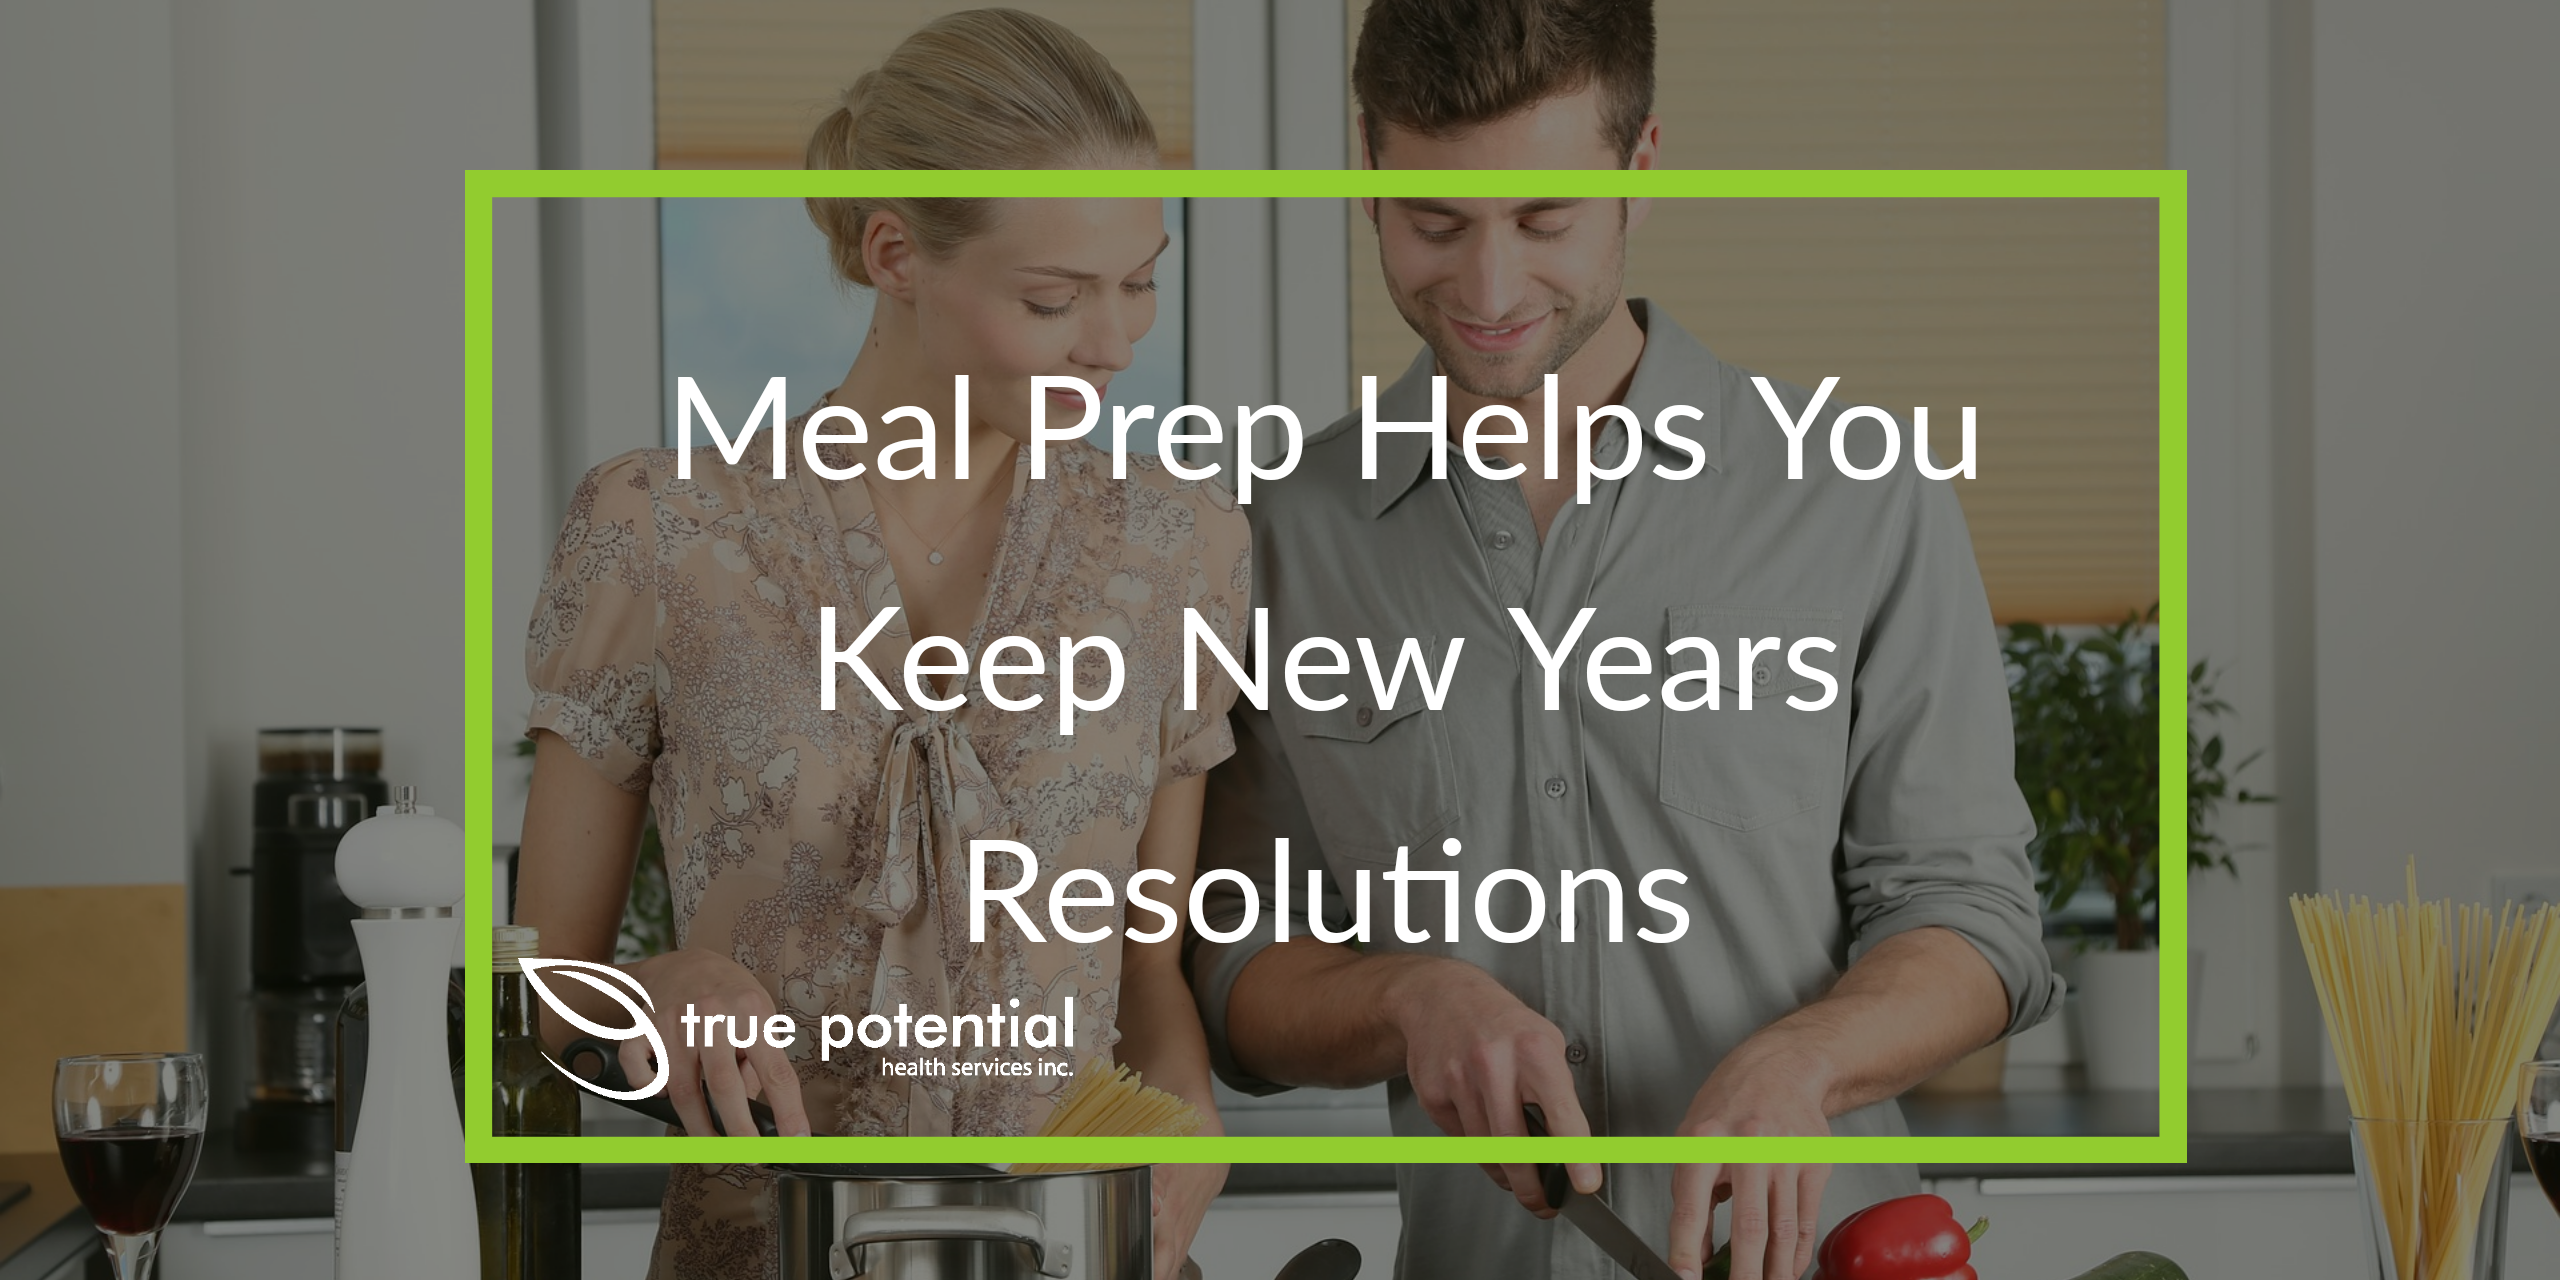 couple Meal Preps to help keep new years resolutions